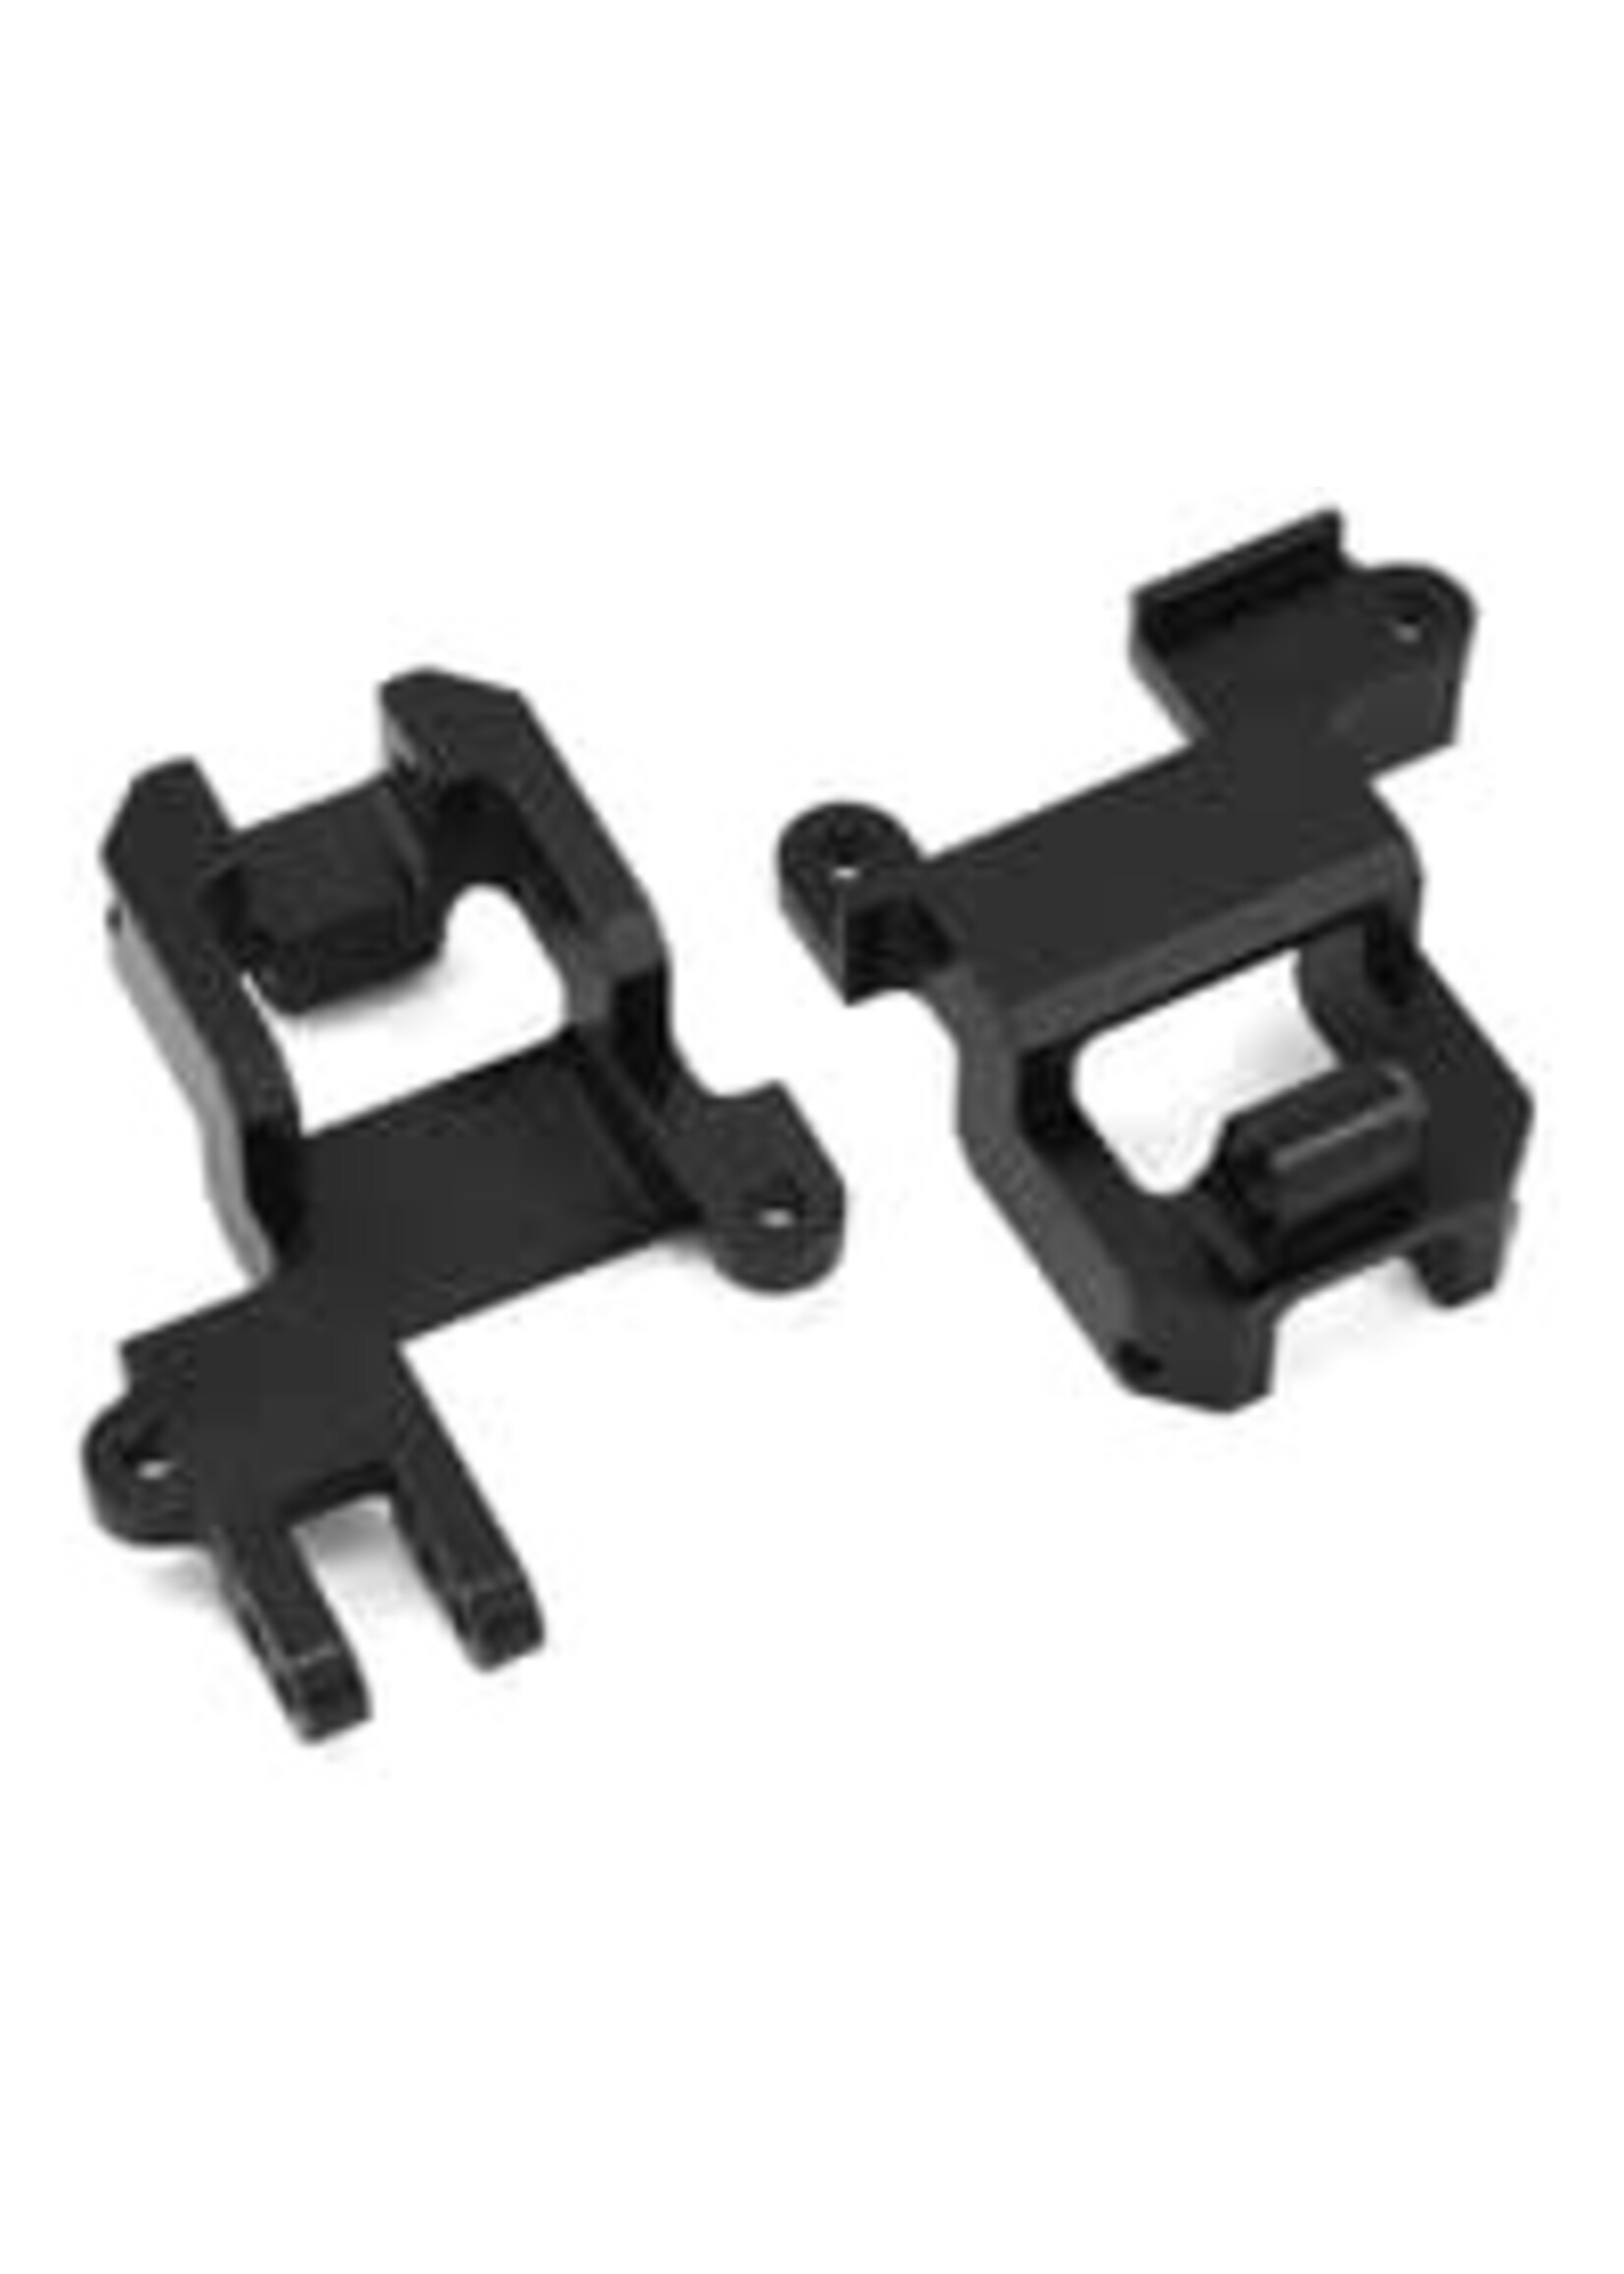 ST Racing Concepts SPTST8216FBK ST Racing Concepts Traxxas TRX-4 HD Front Shock Towers/Panhard Mount (Black)